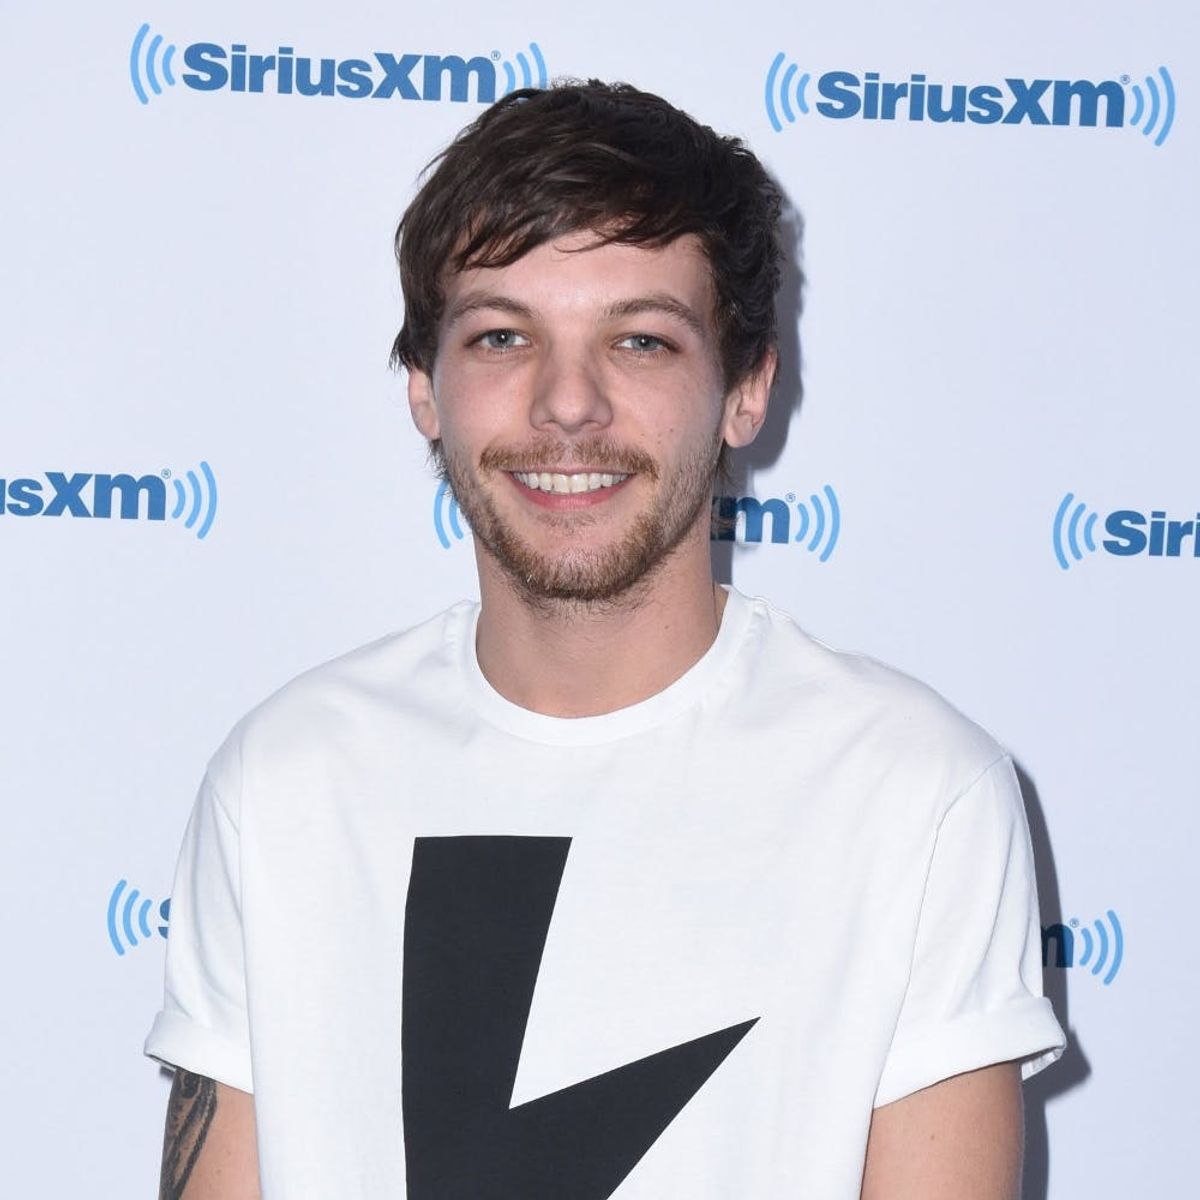 Louis Tomlinson Claims He Was the “Forgettable” Member of One Direction